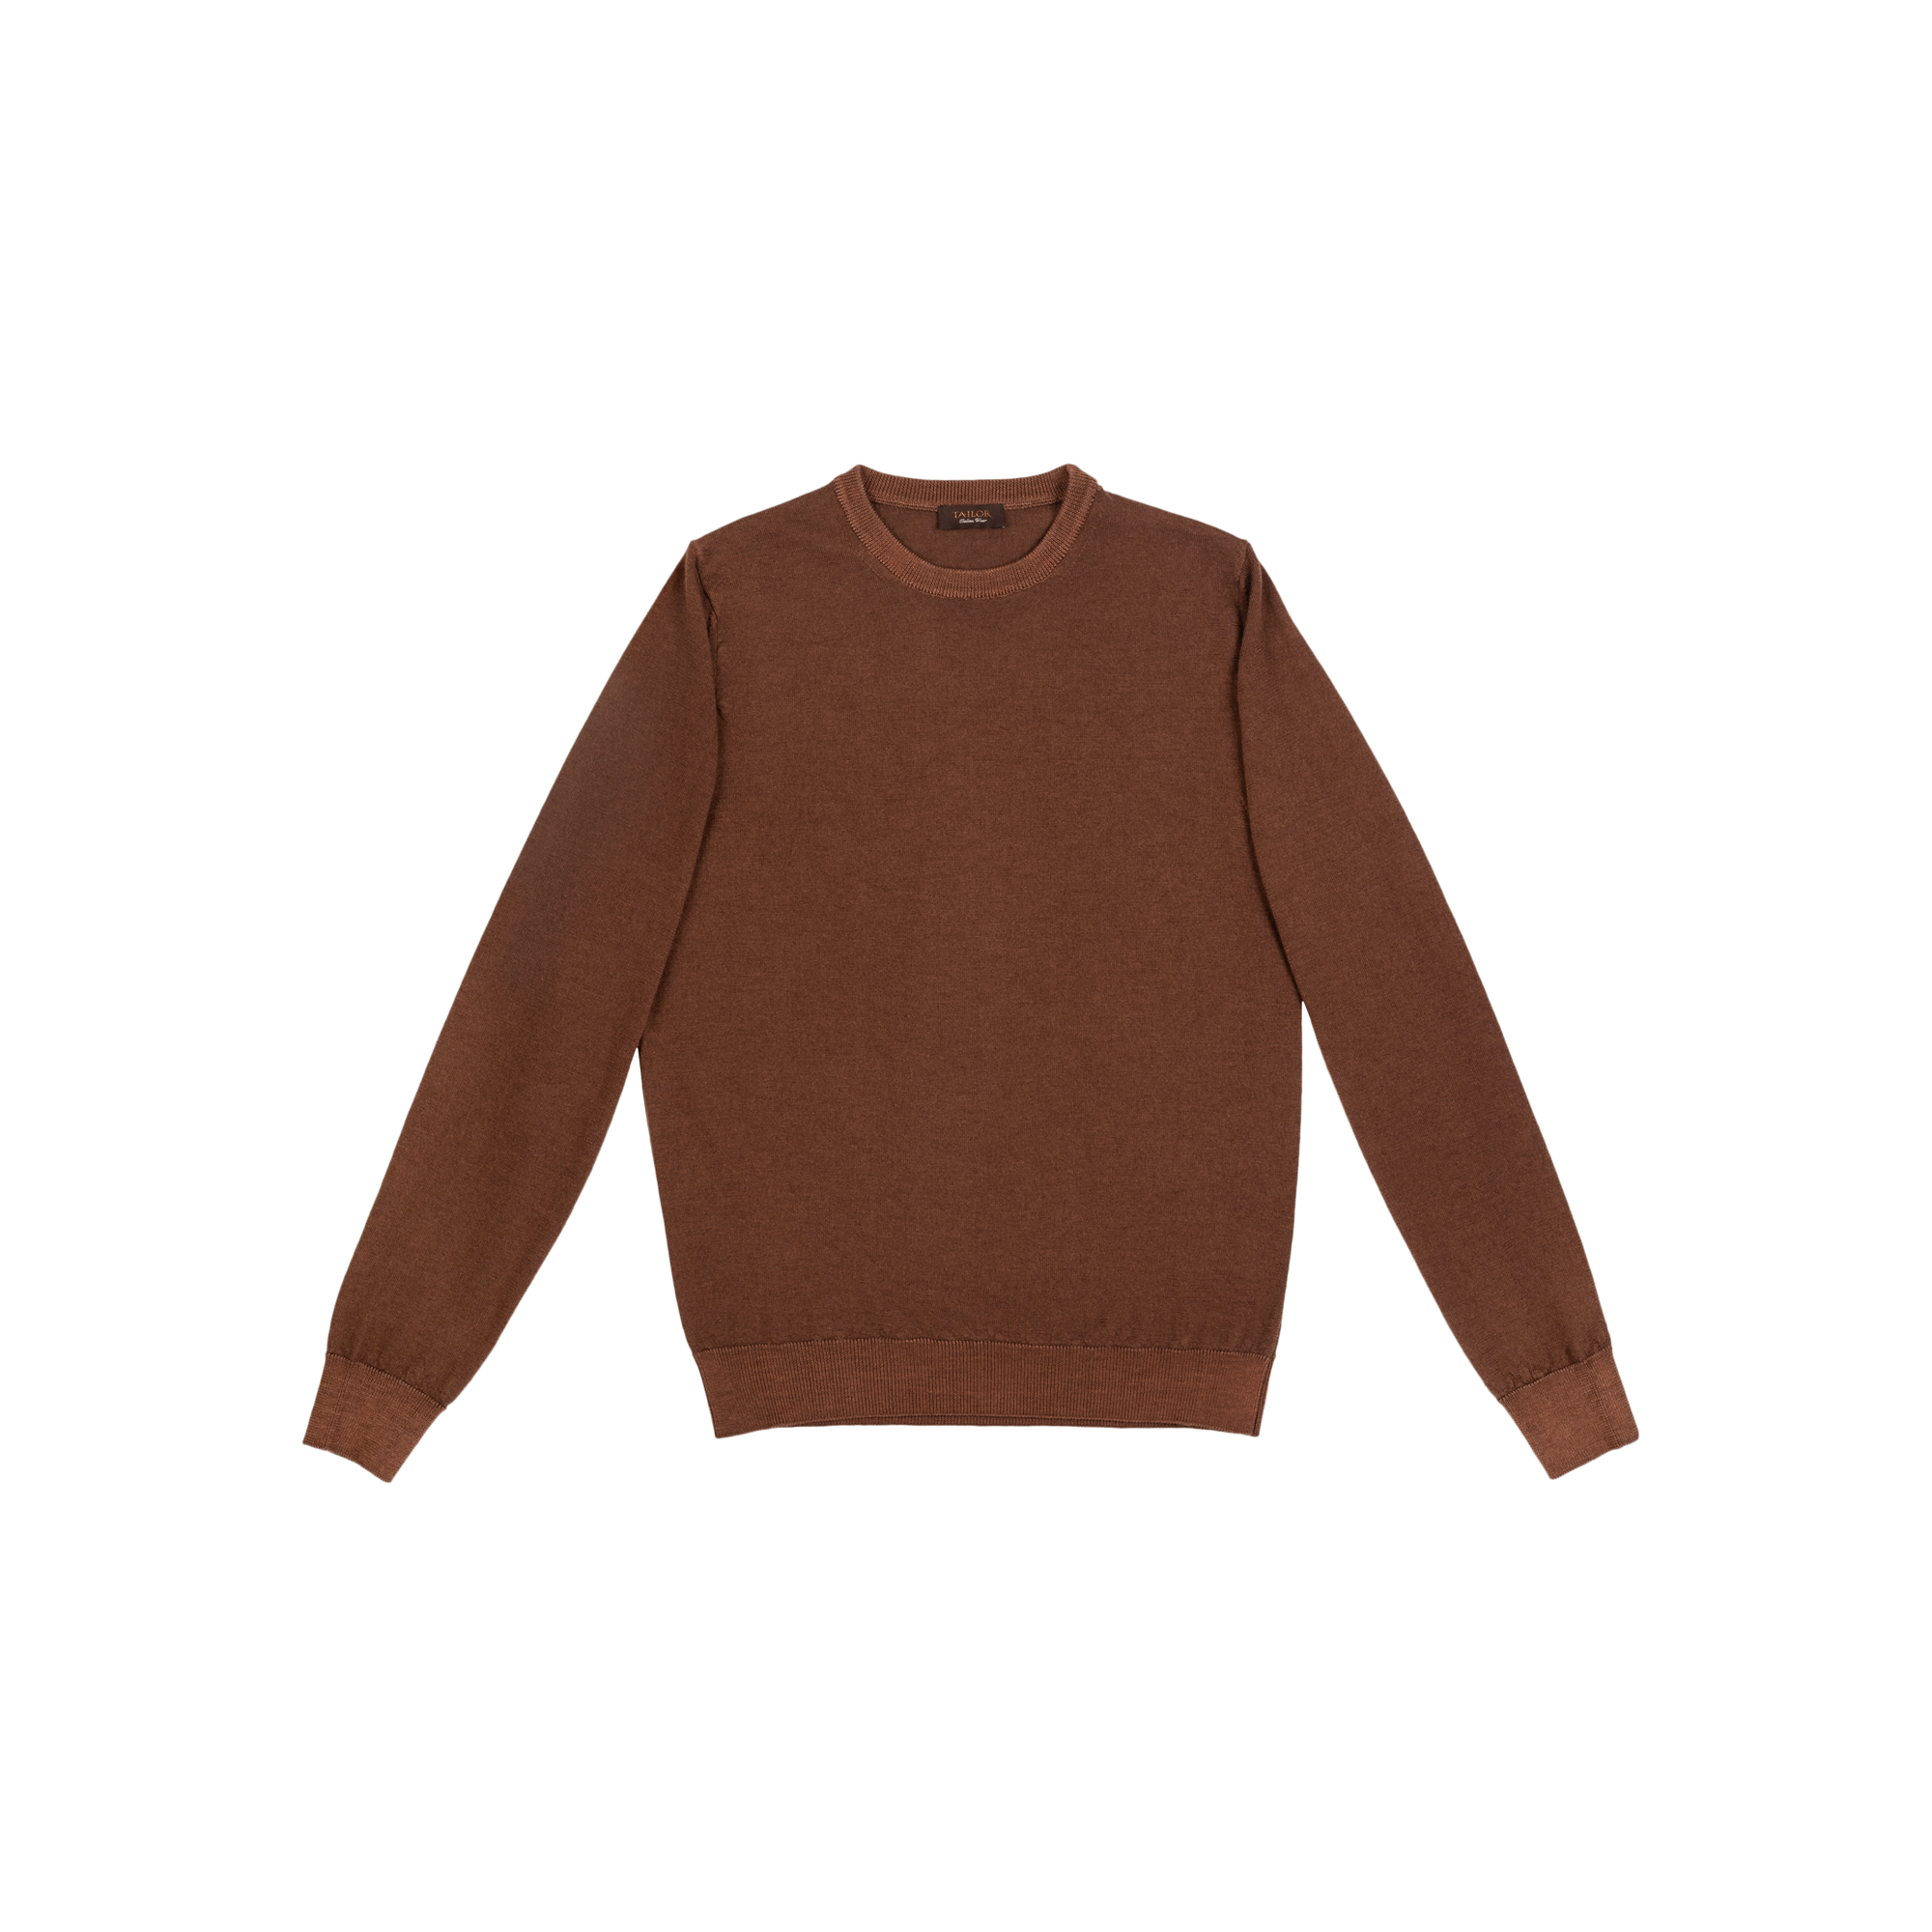 Men's Brown Knitted Crewneck Sweater